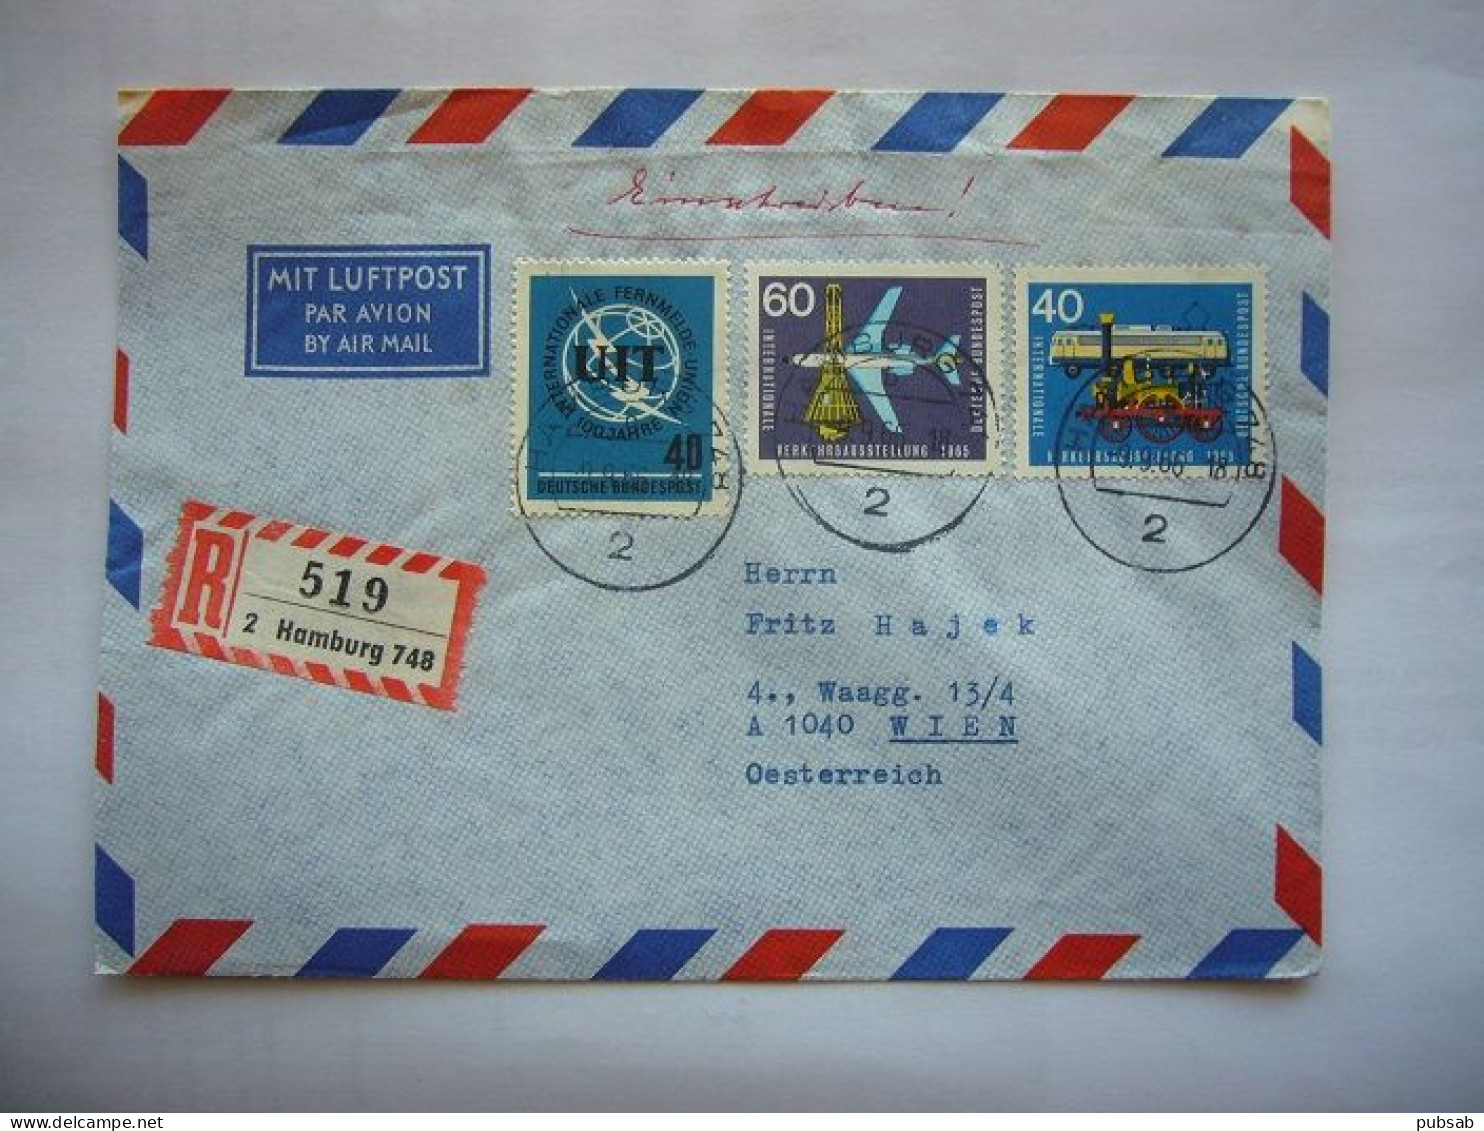 Avion / Airplane / Registered Mail From Hamburg To Wien / Sep 09,66 At 18h - Storia Postale